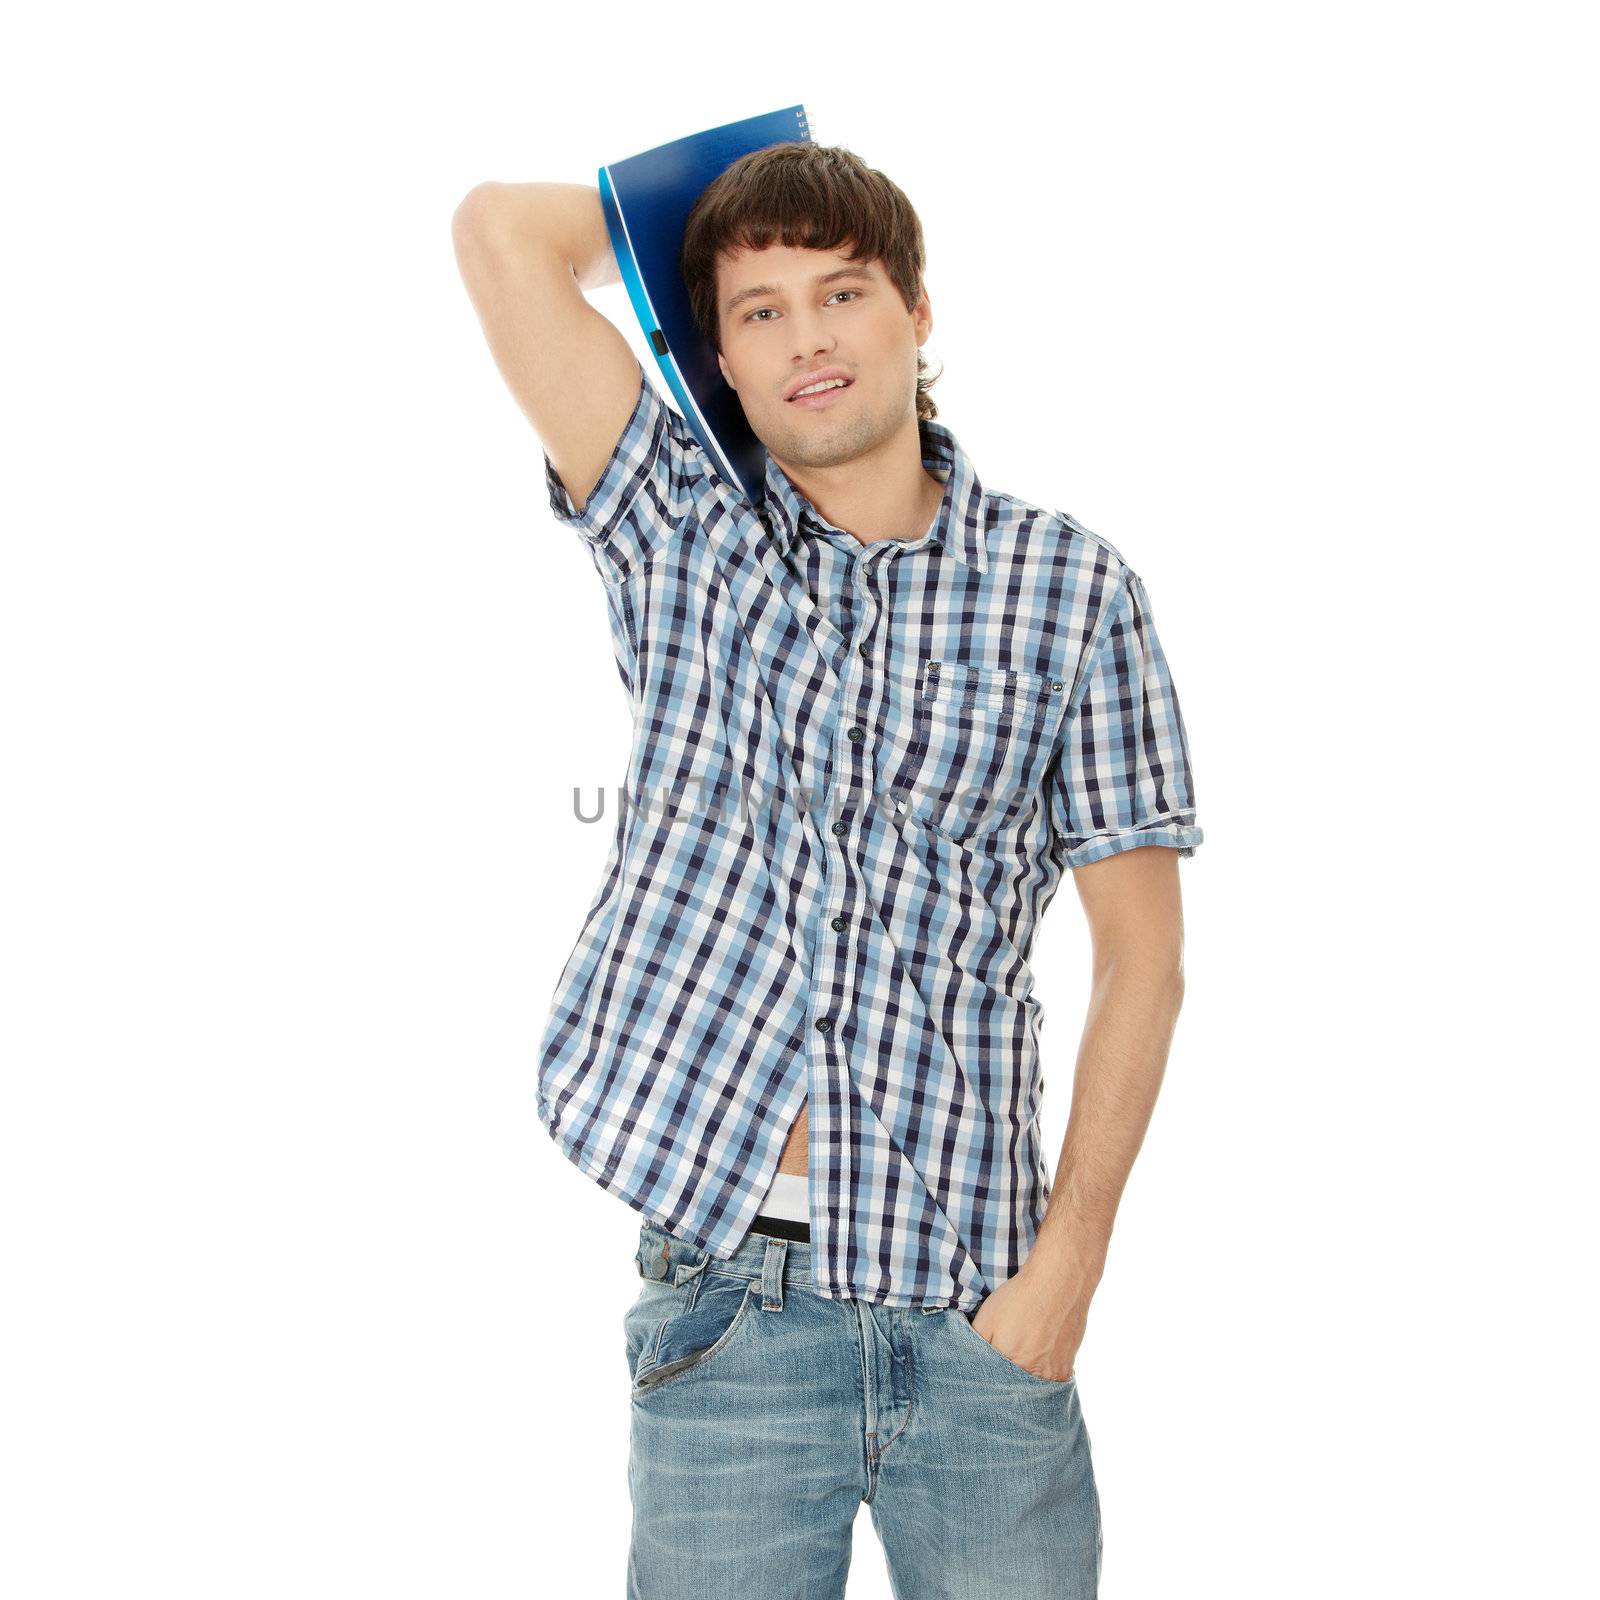 Young student man with notebook,isolated on a white background